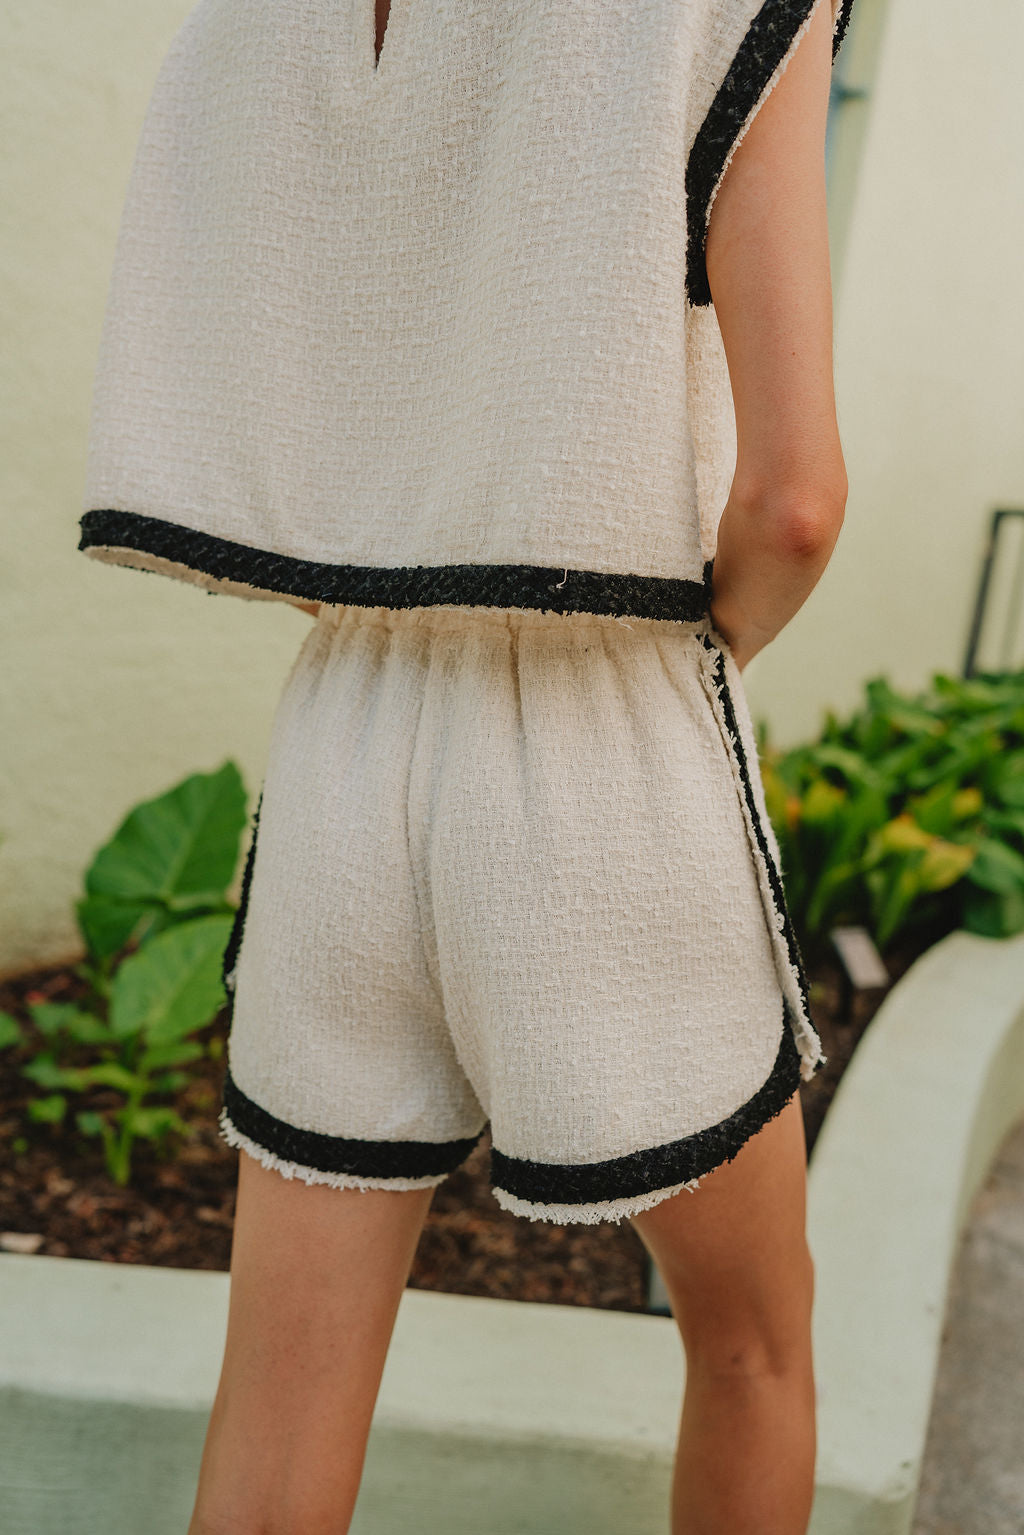 back view of female model wearing the Emery Cream & Black Shorts which features Cream Textured Fabric, Black Trim Details and Elastic Waistband with Drawstring Ties